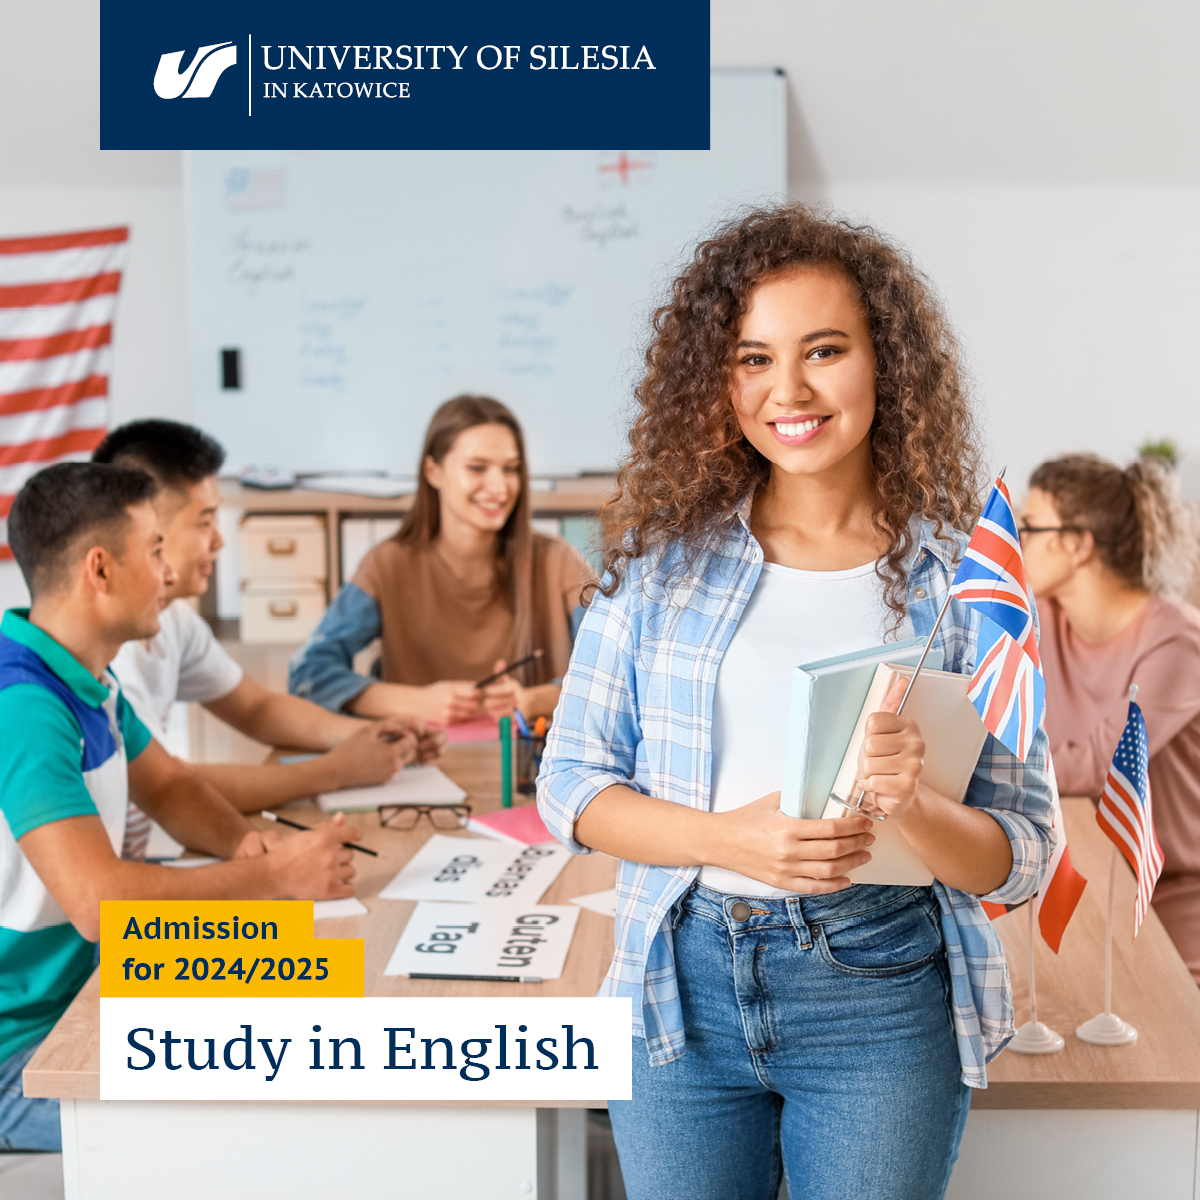 Study in English admission for 2024/2025